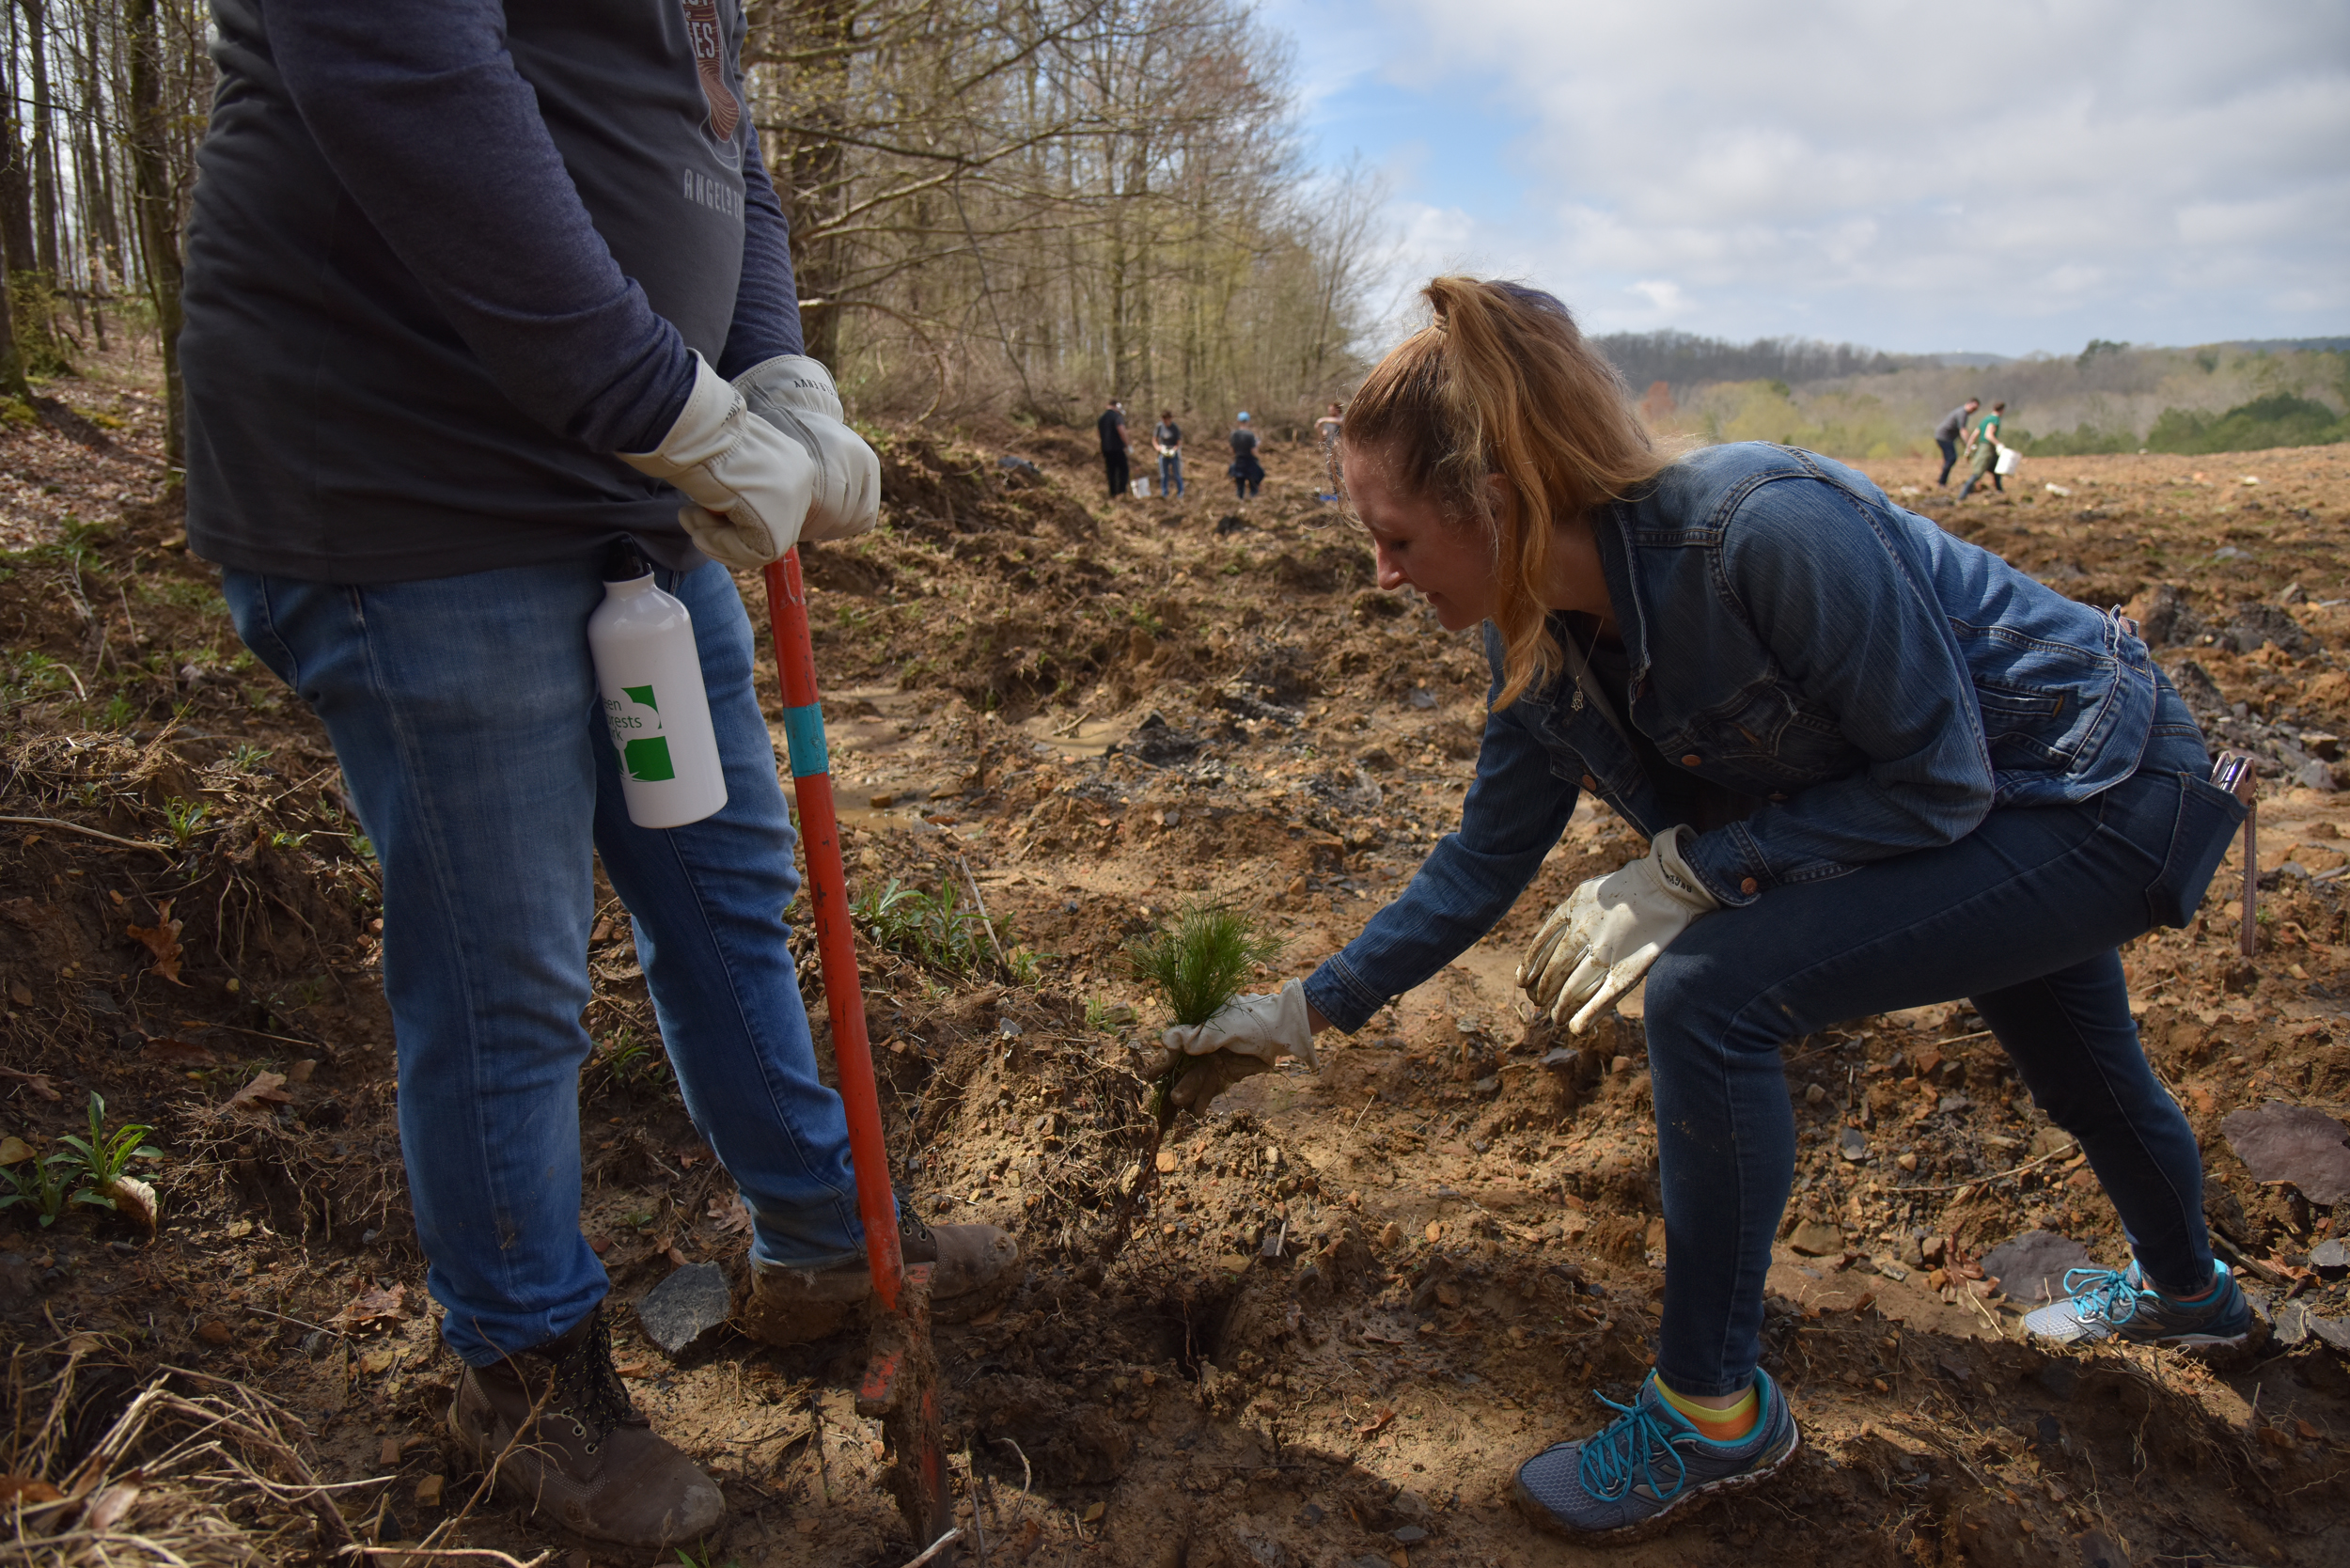 Volunteers plant a mix of native species trees in efforts to reforest abandoned coal mine lands of Appalachia in London, Kentucky. Credit: Jahi Chikwendiu/The Washington Post via Getty Images